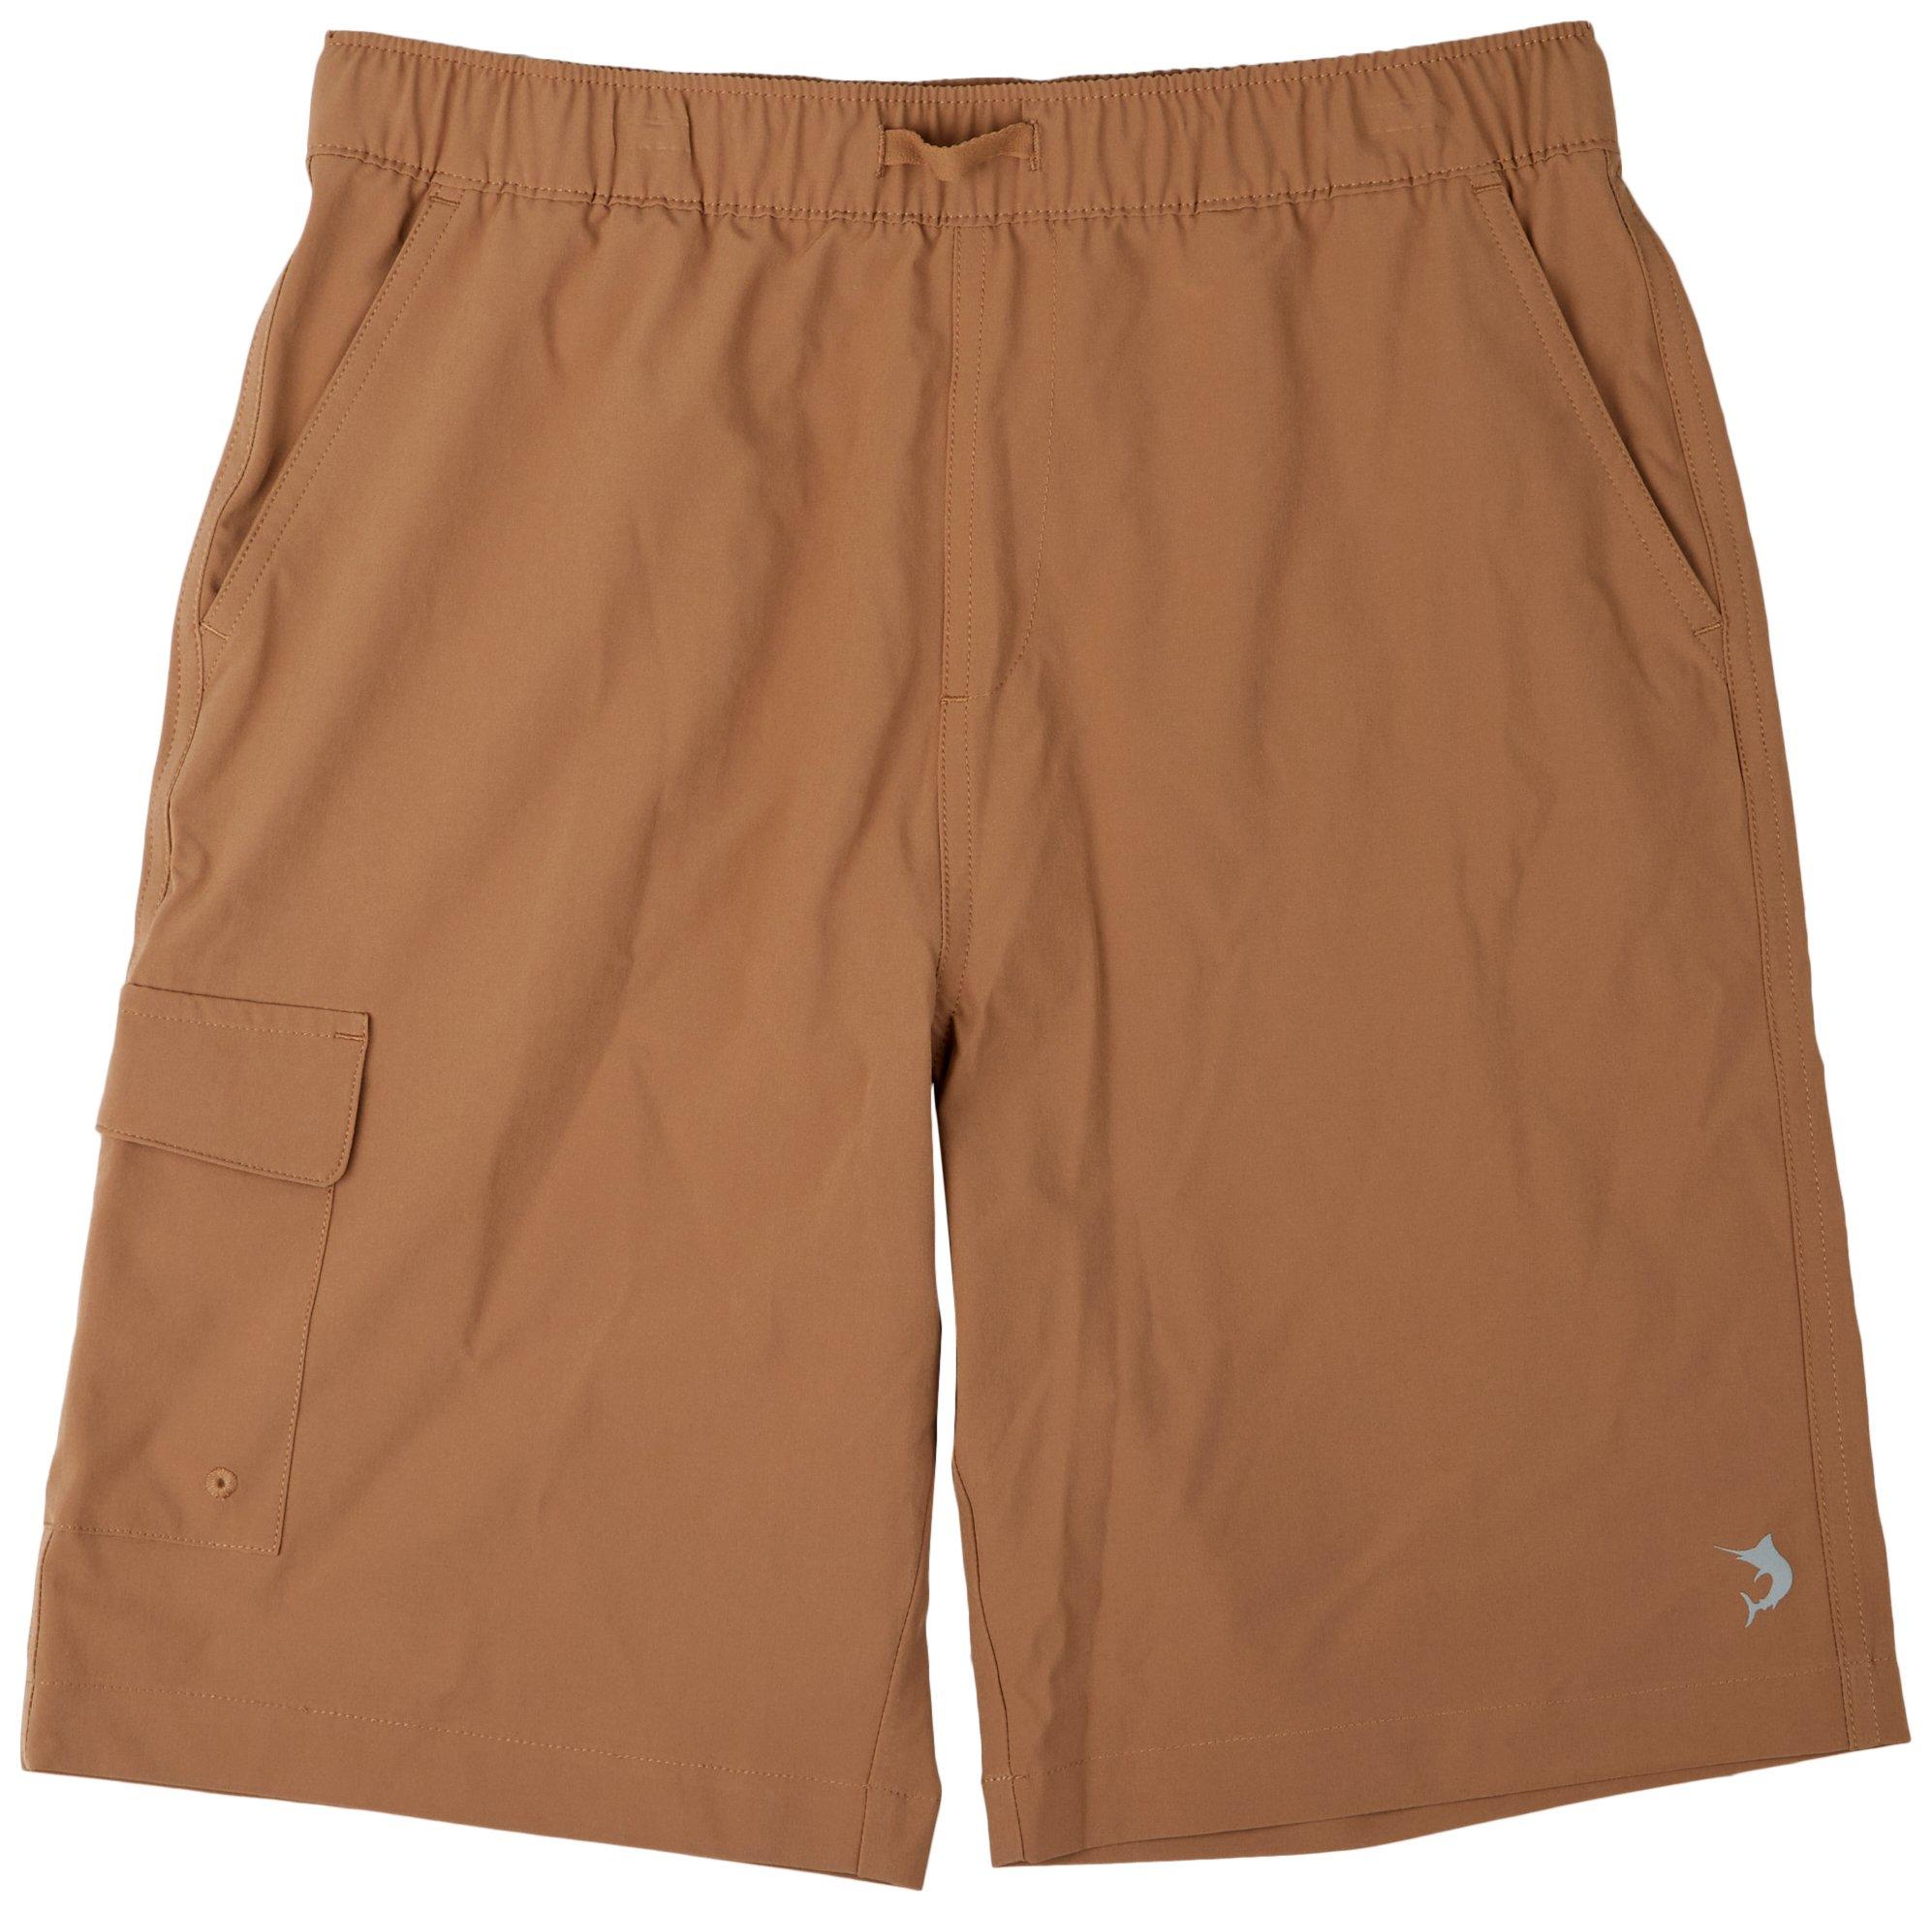 Reel Legends Quick Drying Shorts